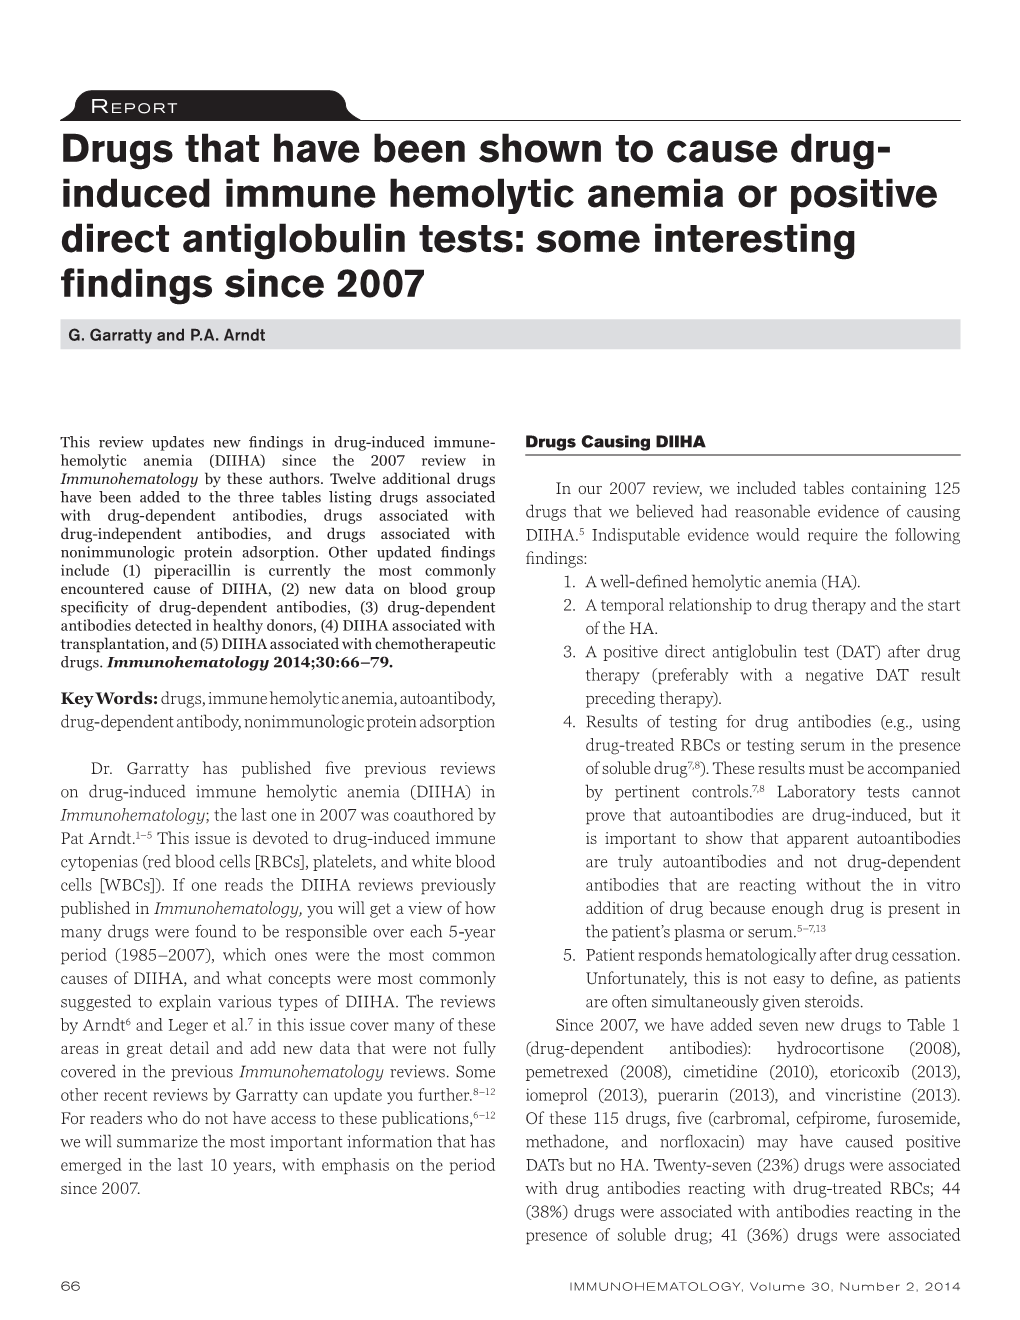 Drugs That Have Been Shown to Cause Drug- Induced Immune Hemolytic Anemia Or Positive Direct Antiglobulin Tests: Some Interesting Findings Since 2007